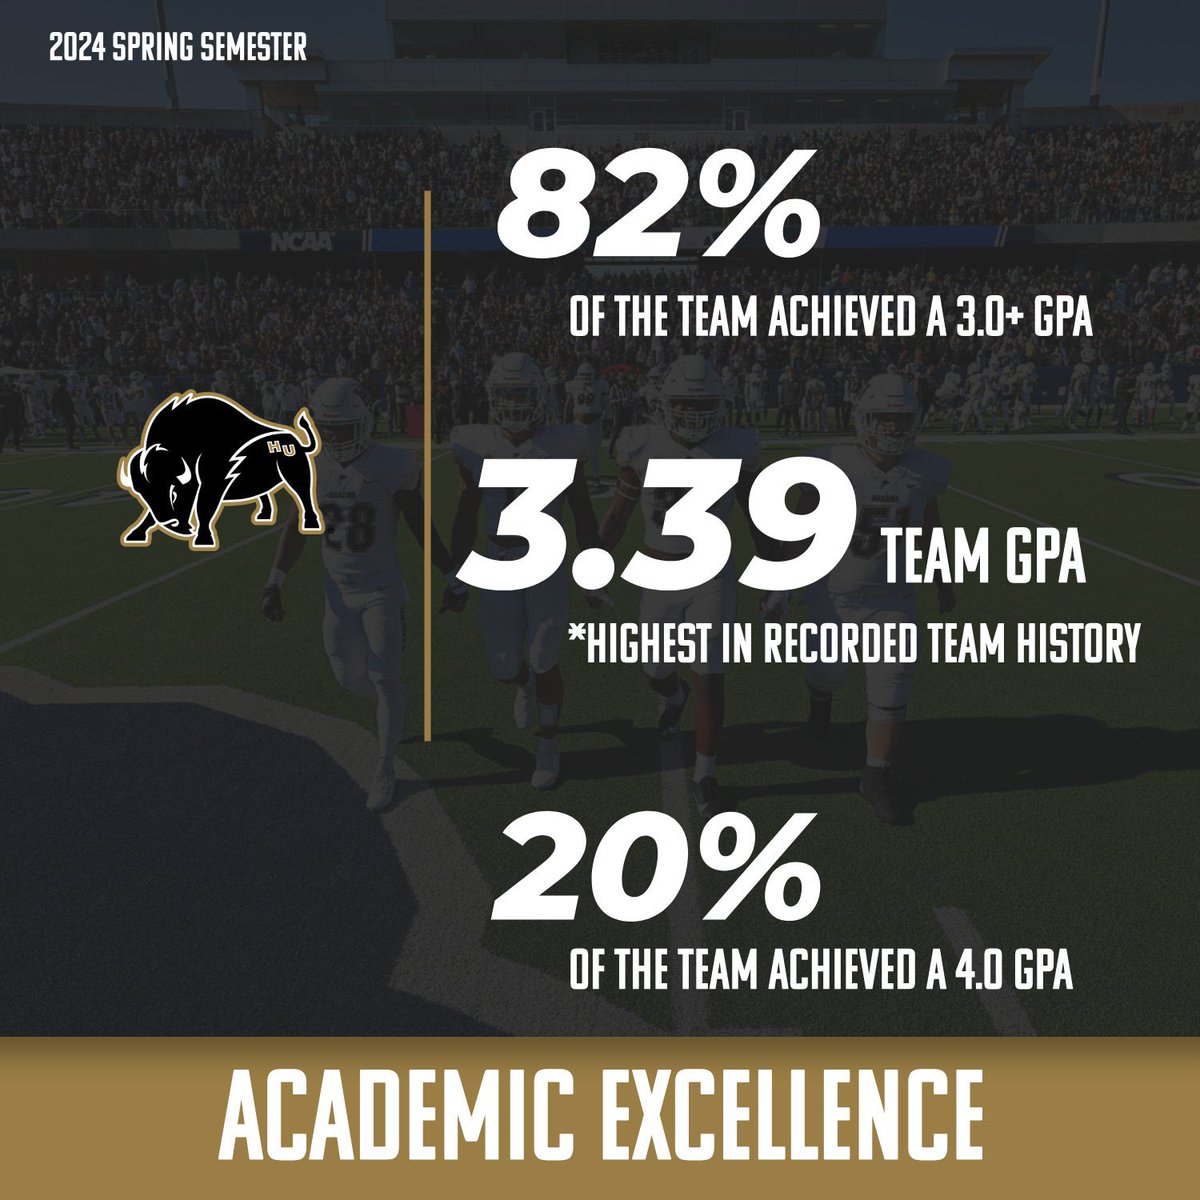 Excellence on and off the field! 📈 #HonorGod